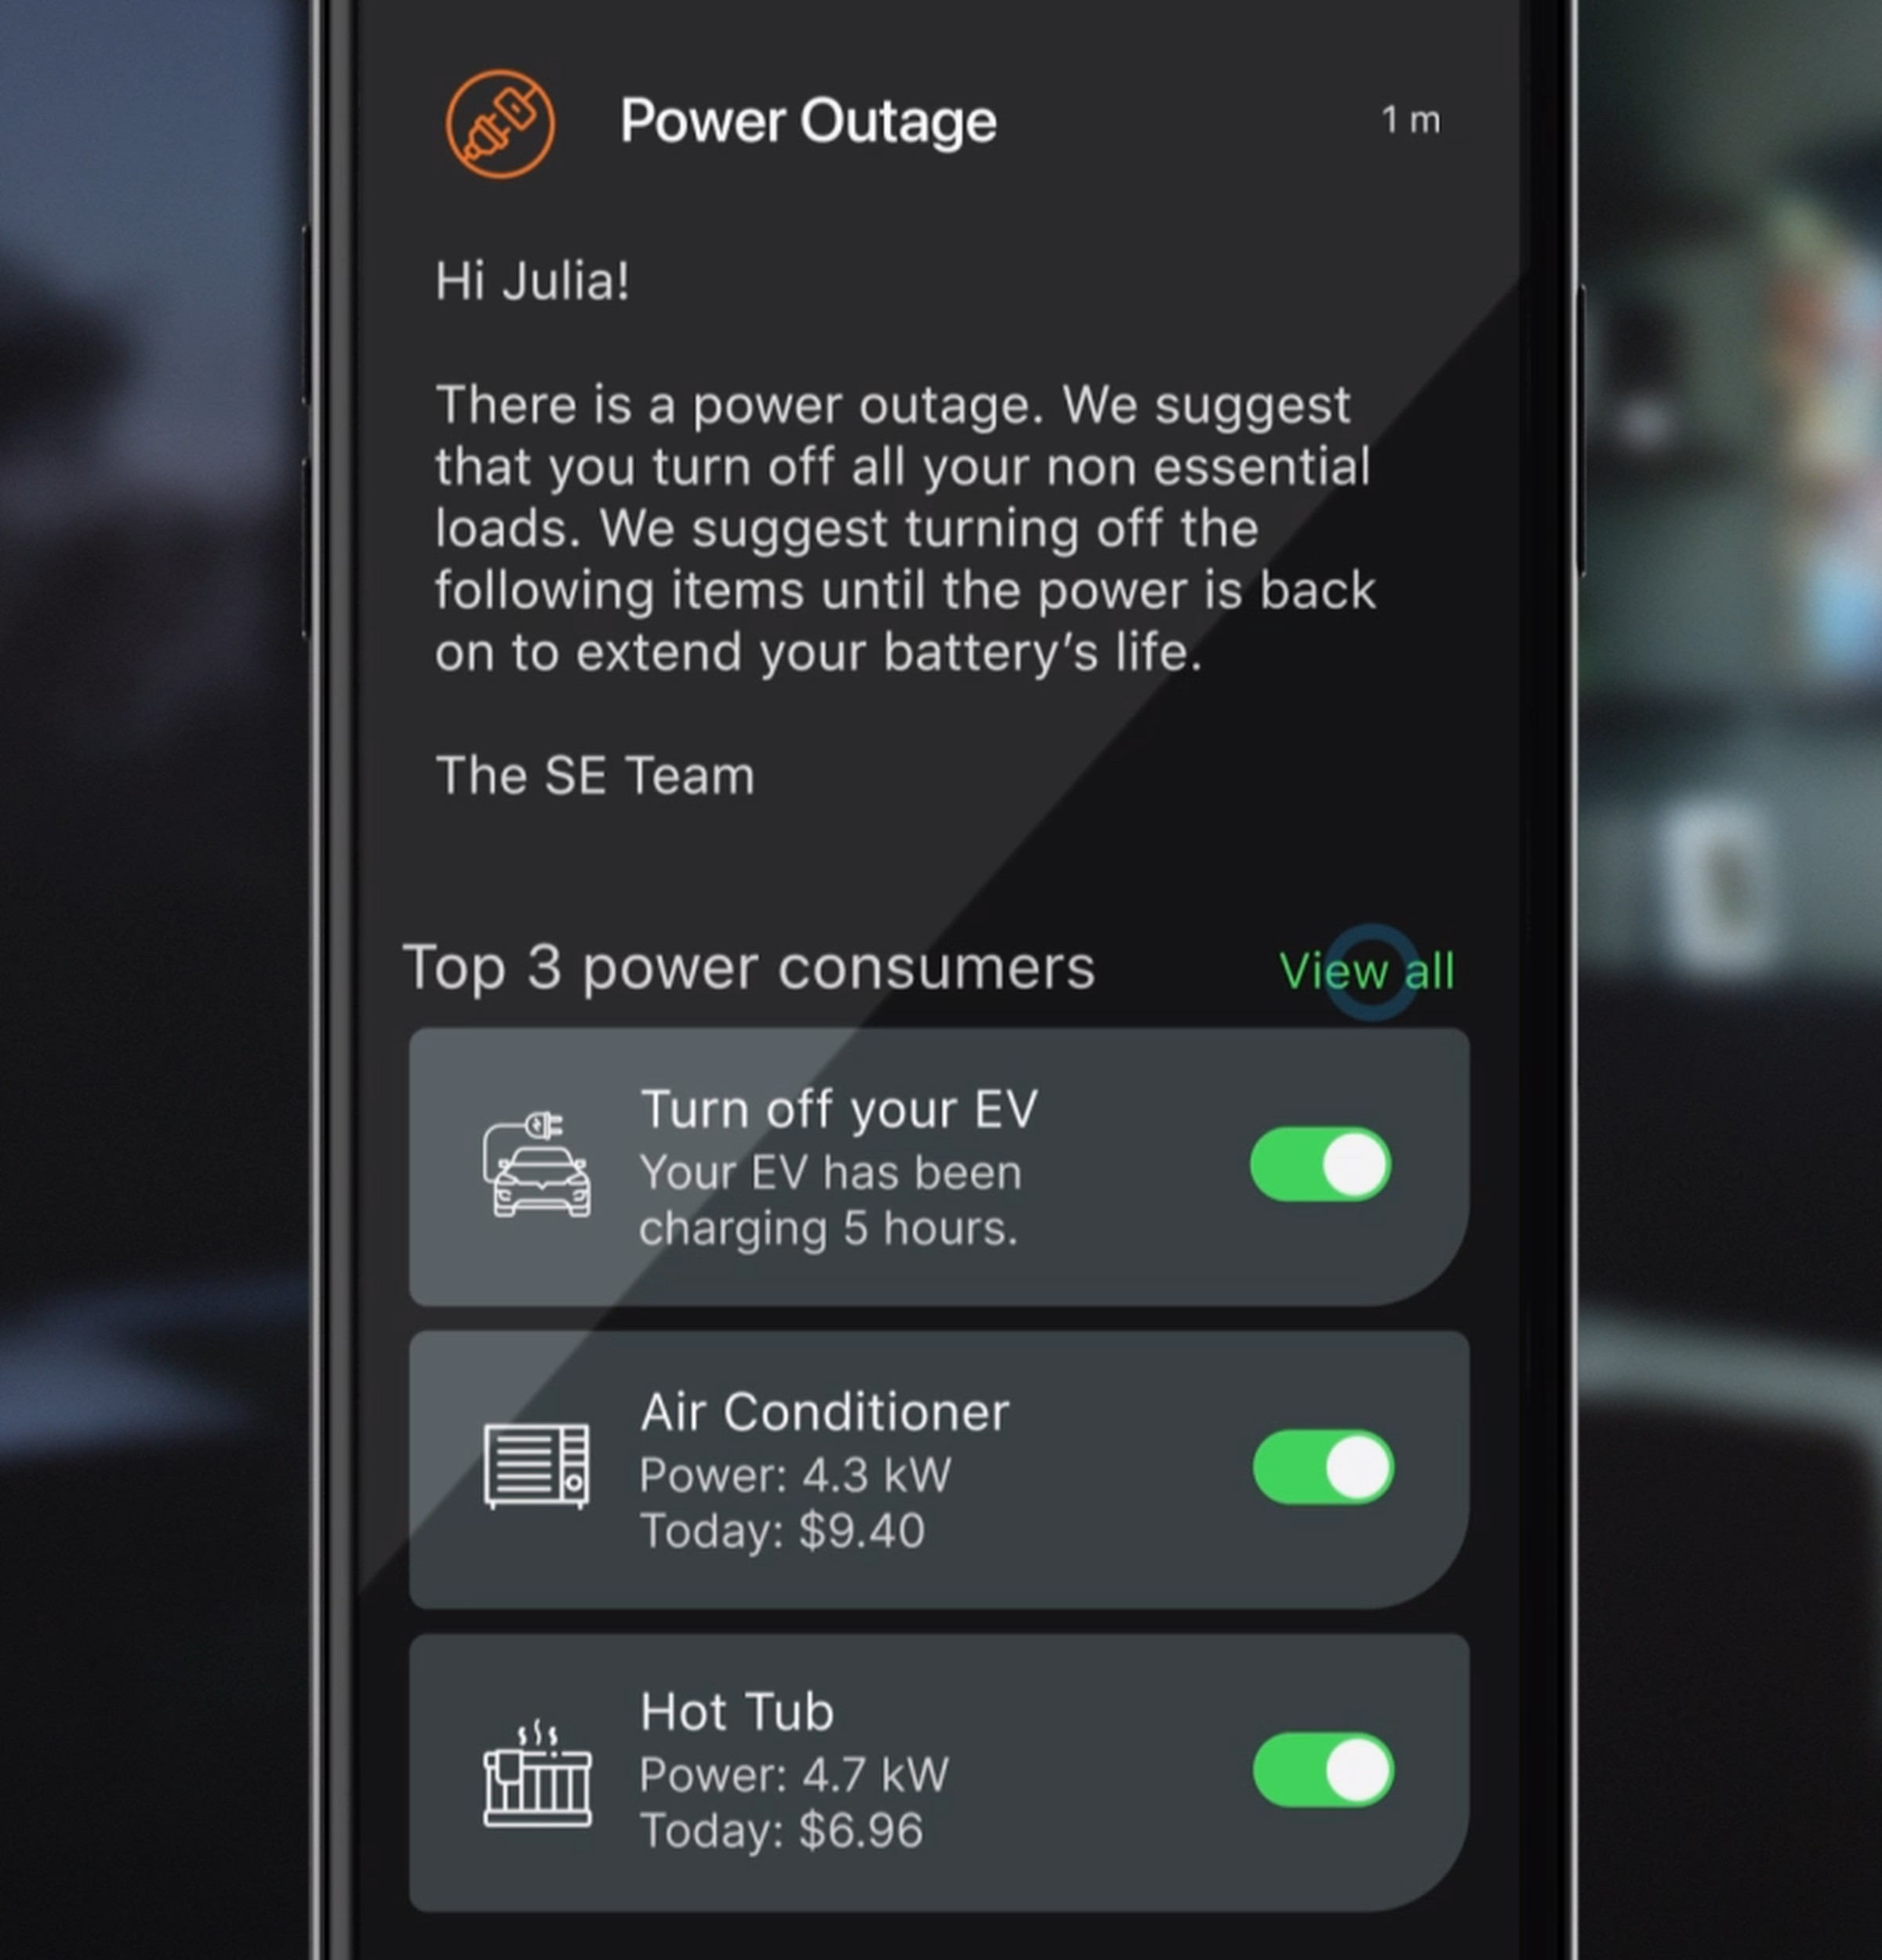 Hi Julia!  There is a power outage.  We suggest that you turn off all your non-essential loads”, reads the notification.  It then tells her which are the top power consumers and offers switches.